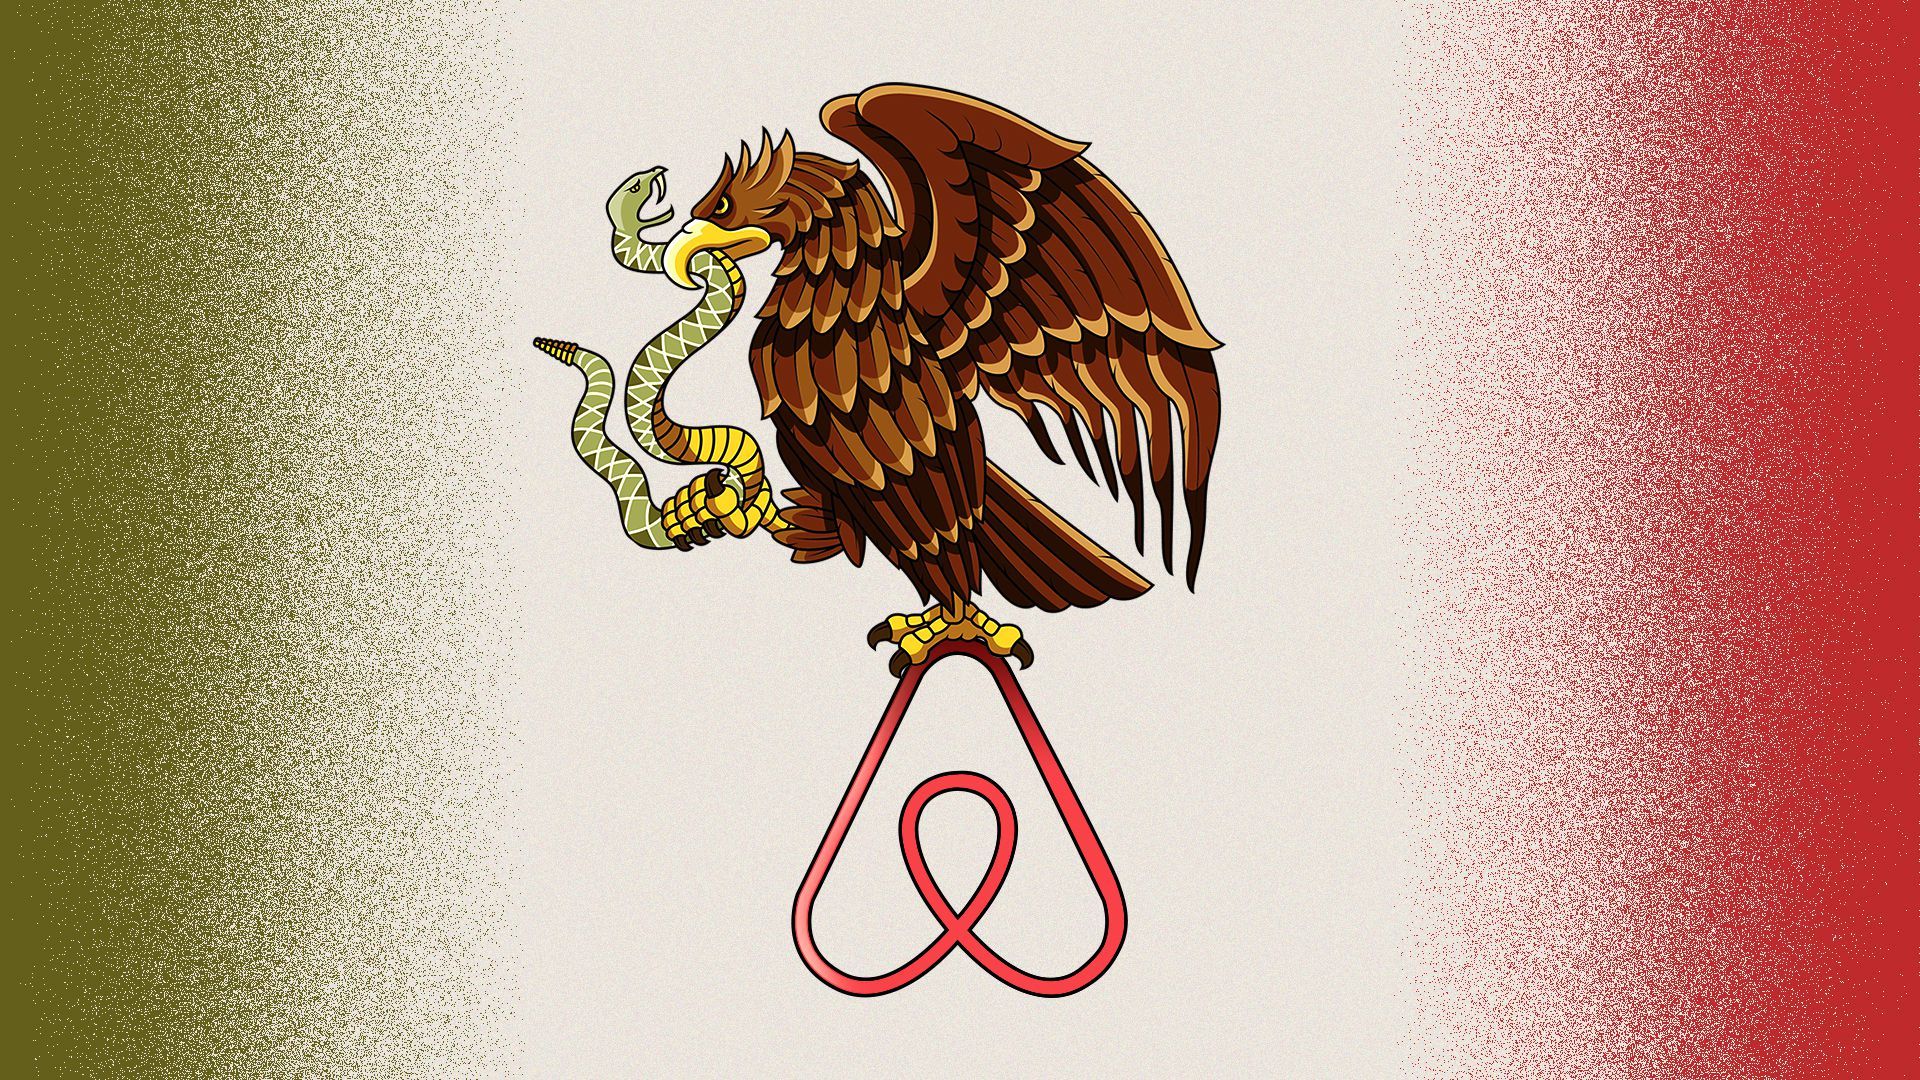 Illustration of the Mexican Coat of Arms, with the eagle perched on the Airbnb logo.